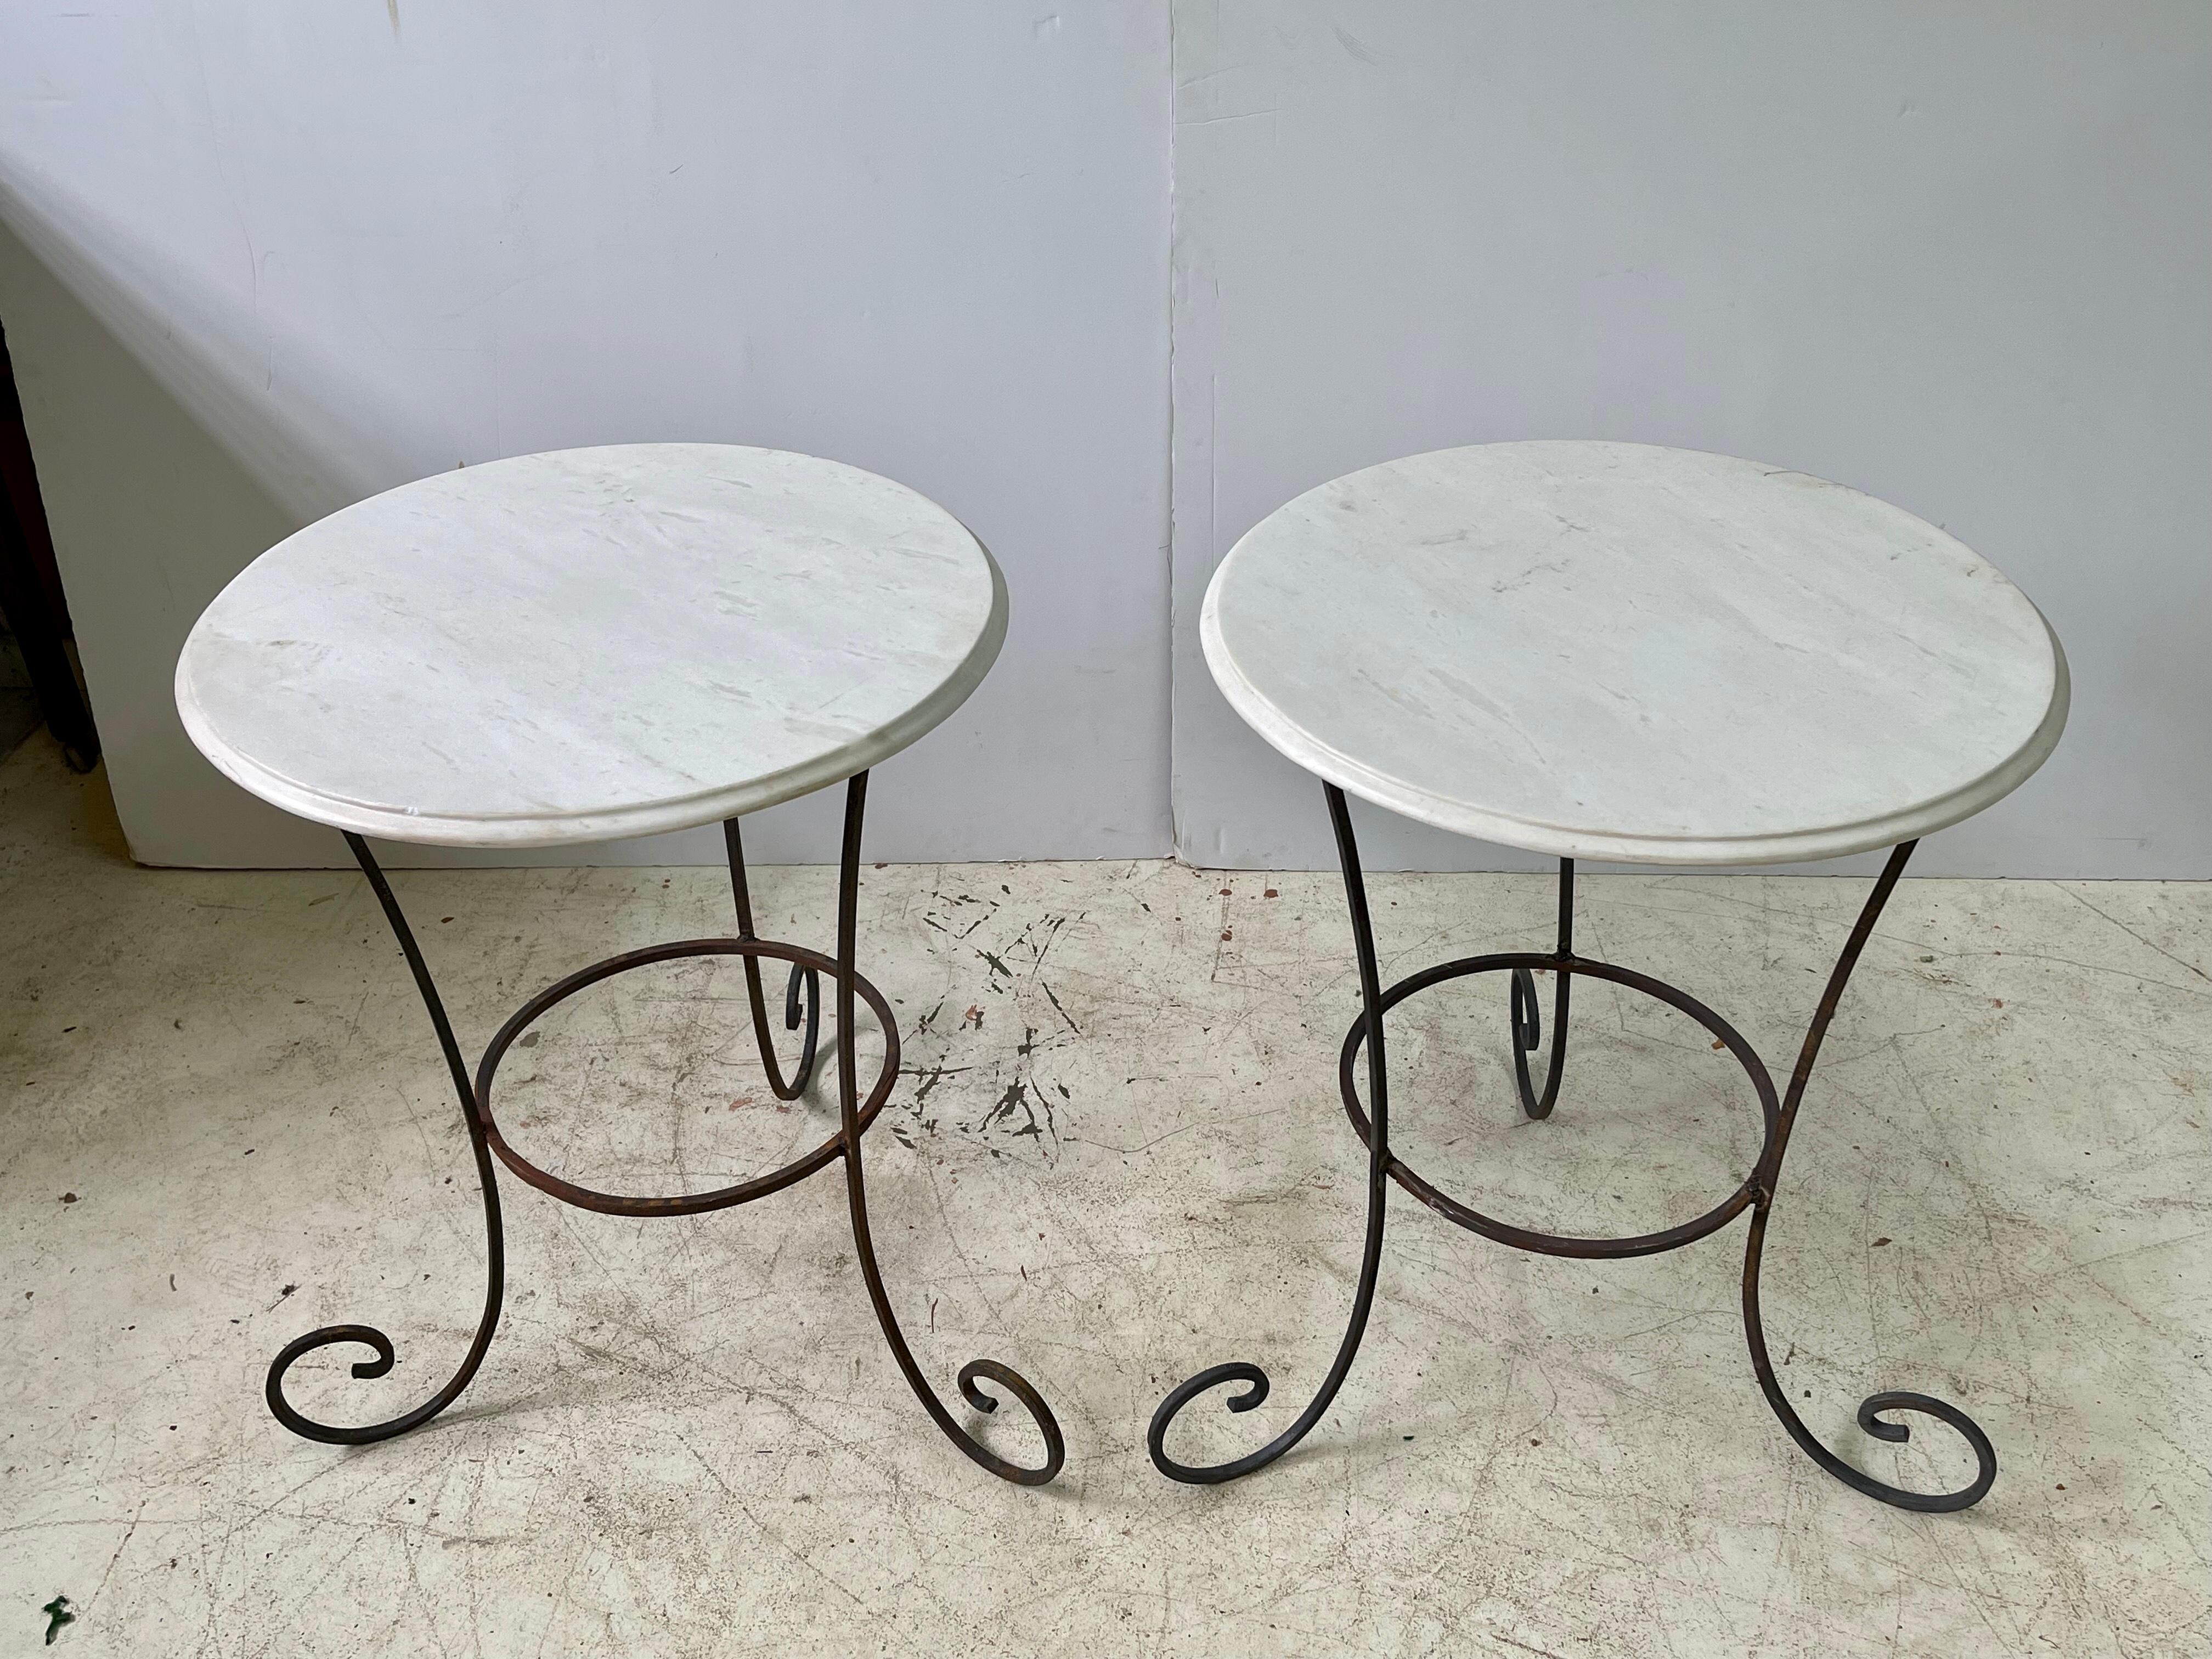 Wrought Iron Vintage Pair of French Forged Iron Side Tables with White Marble Tops